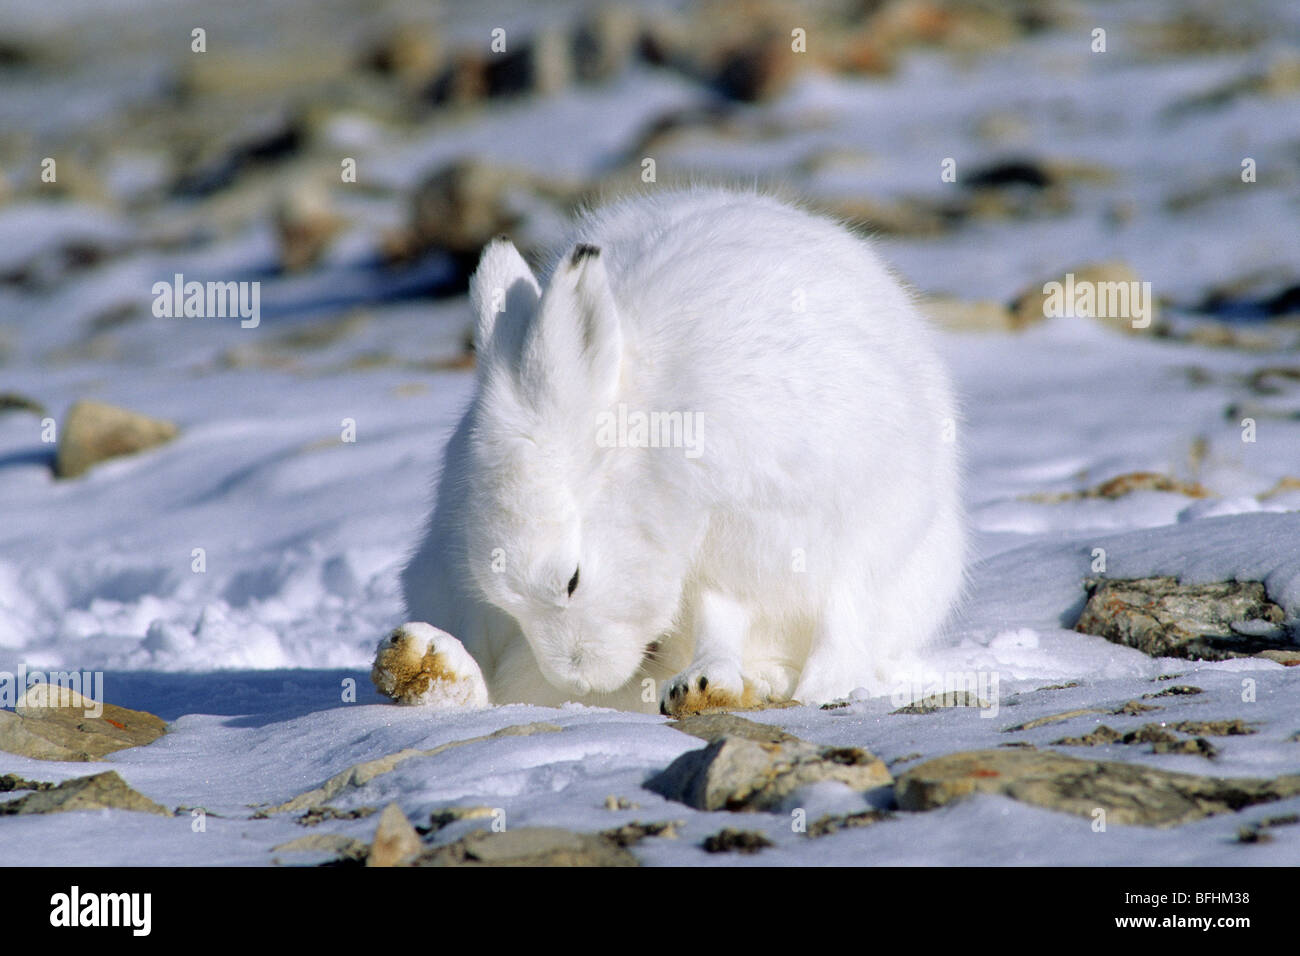 Adult arctic hare (Lepus arcticus) eating its own droppings, northern Ellesmere Island, Nunavut, Arctic Canada Stock Photo